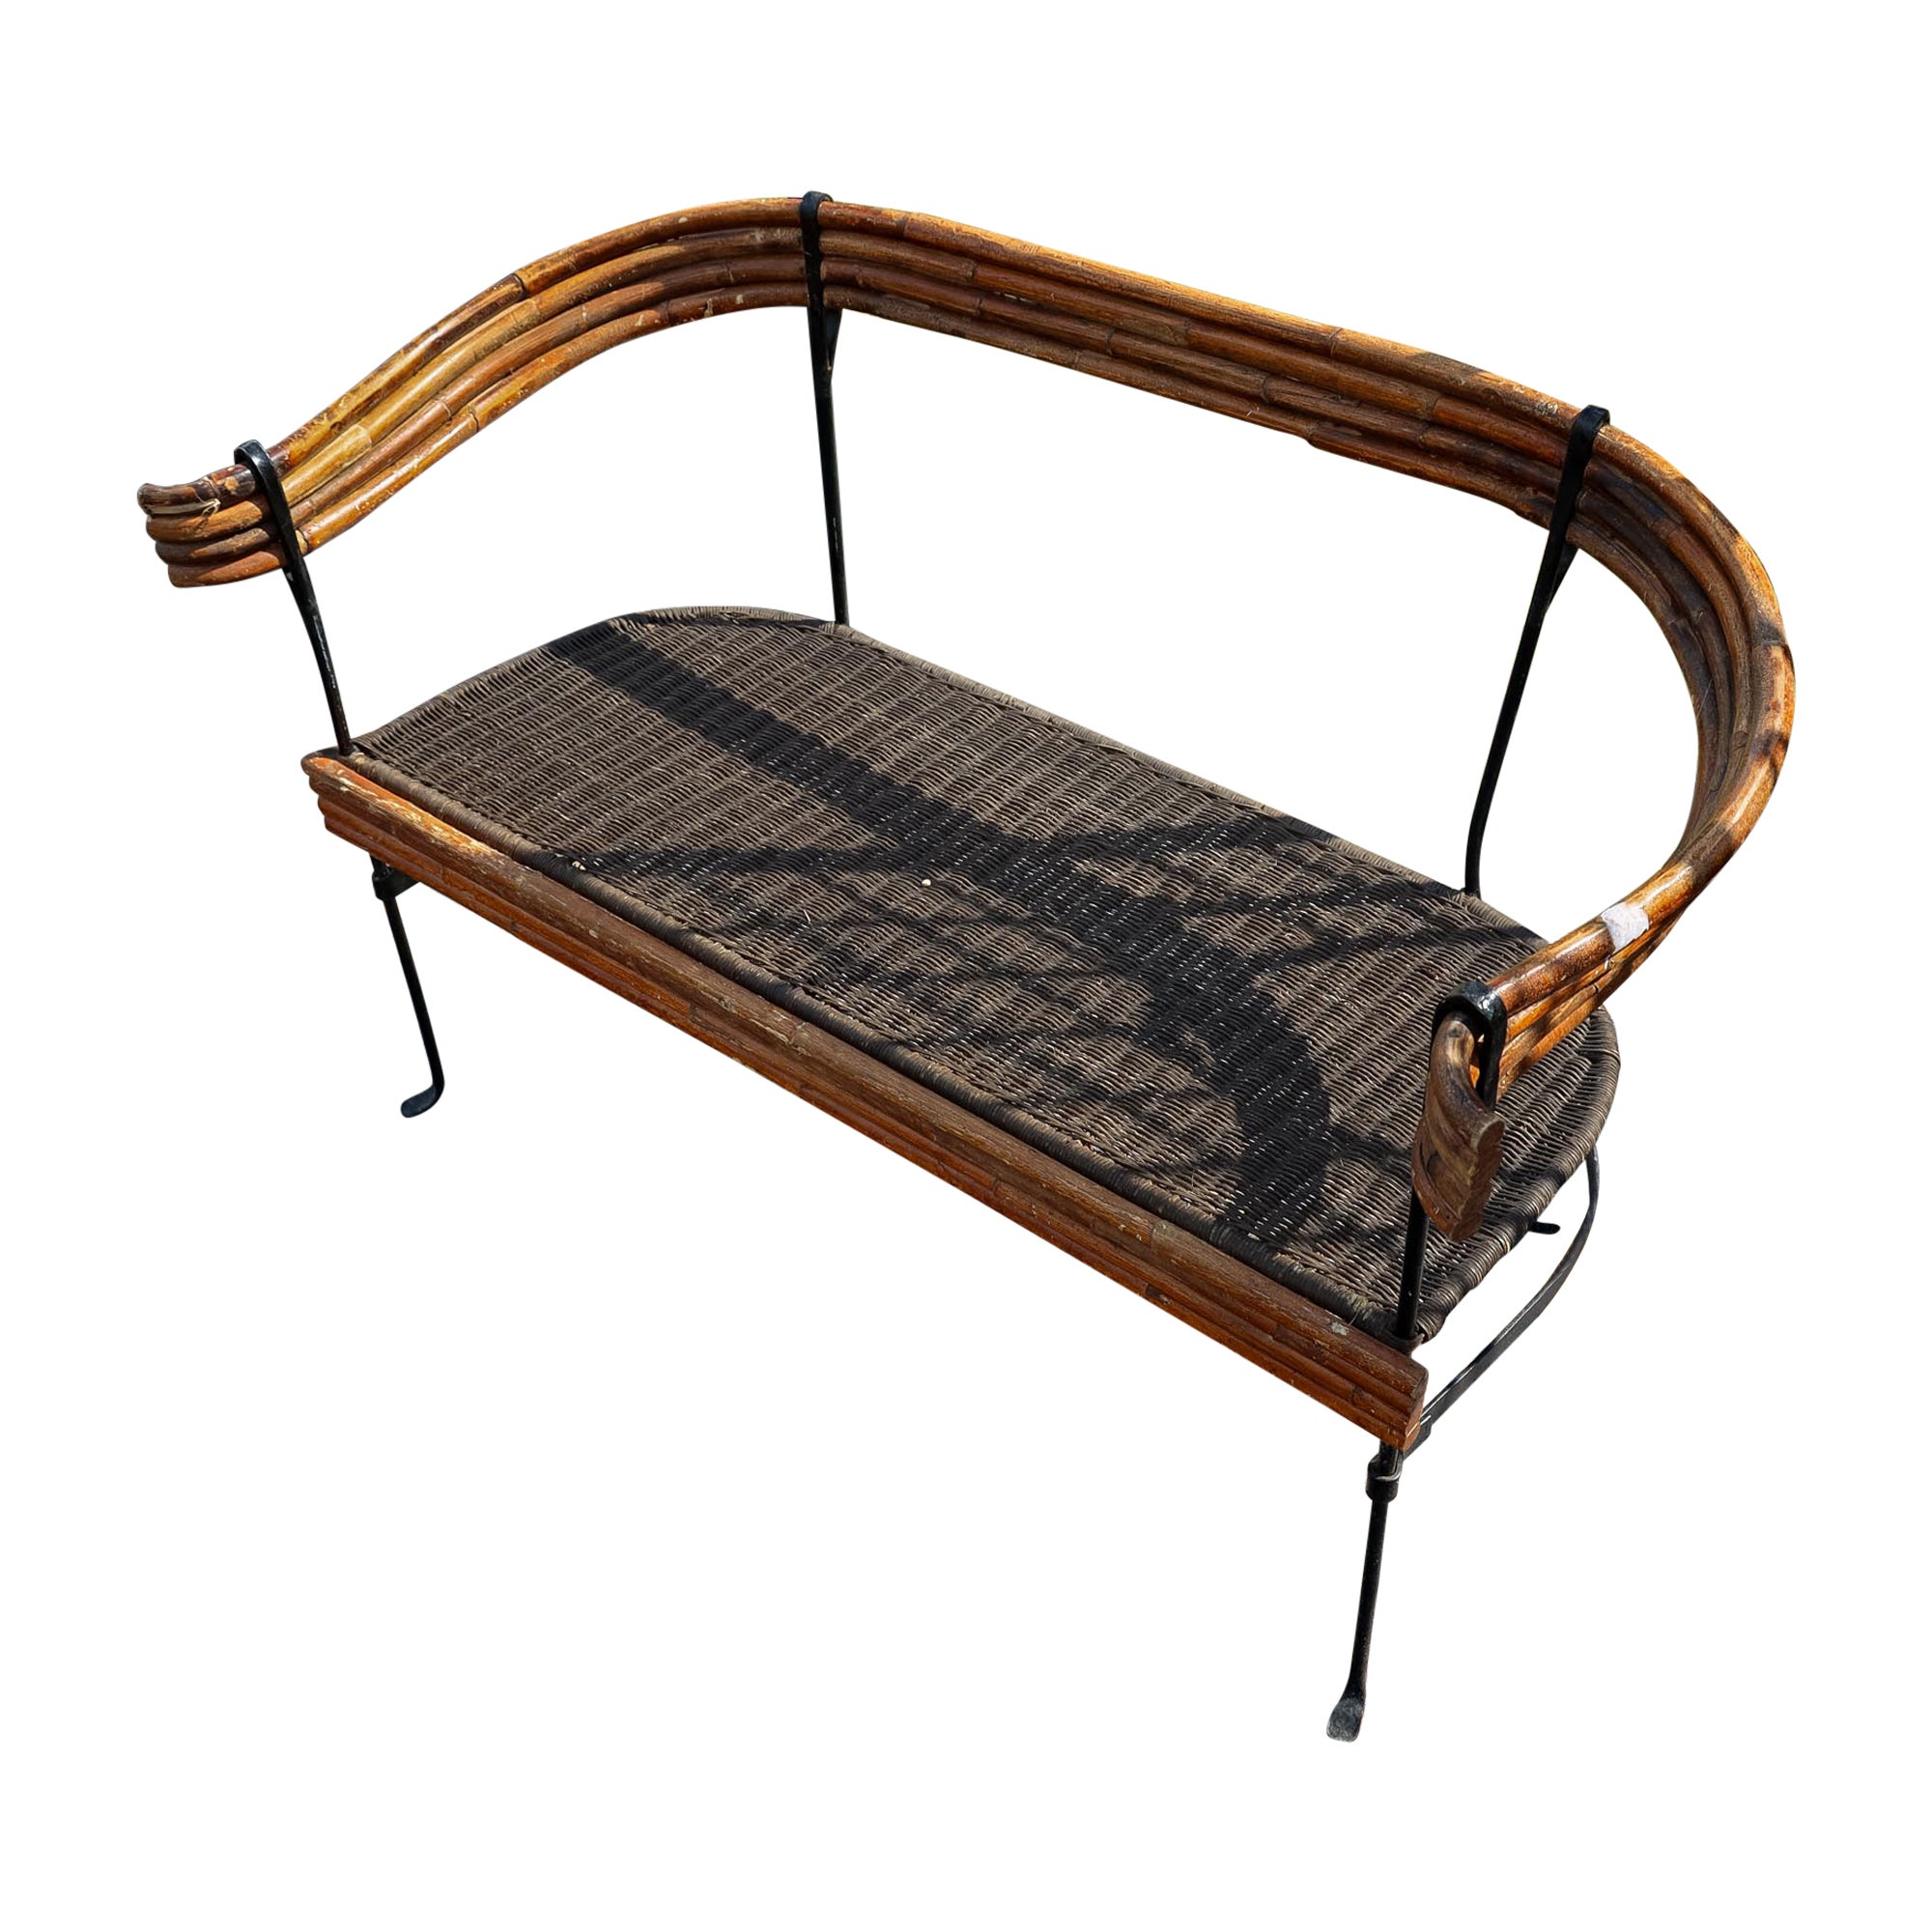 Bamboo Seating Group with two Armchairs, Wicker and Iron, Italy Mid-20th Century For Sale